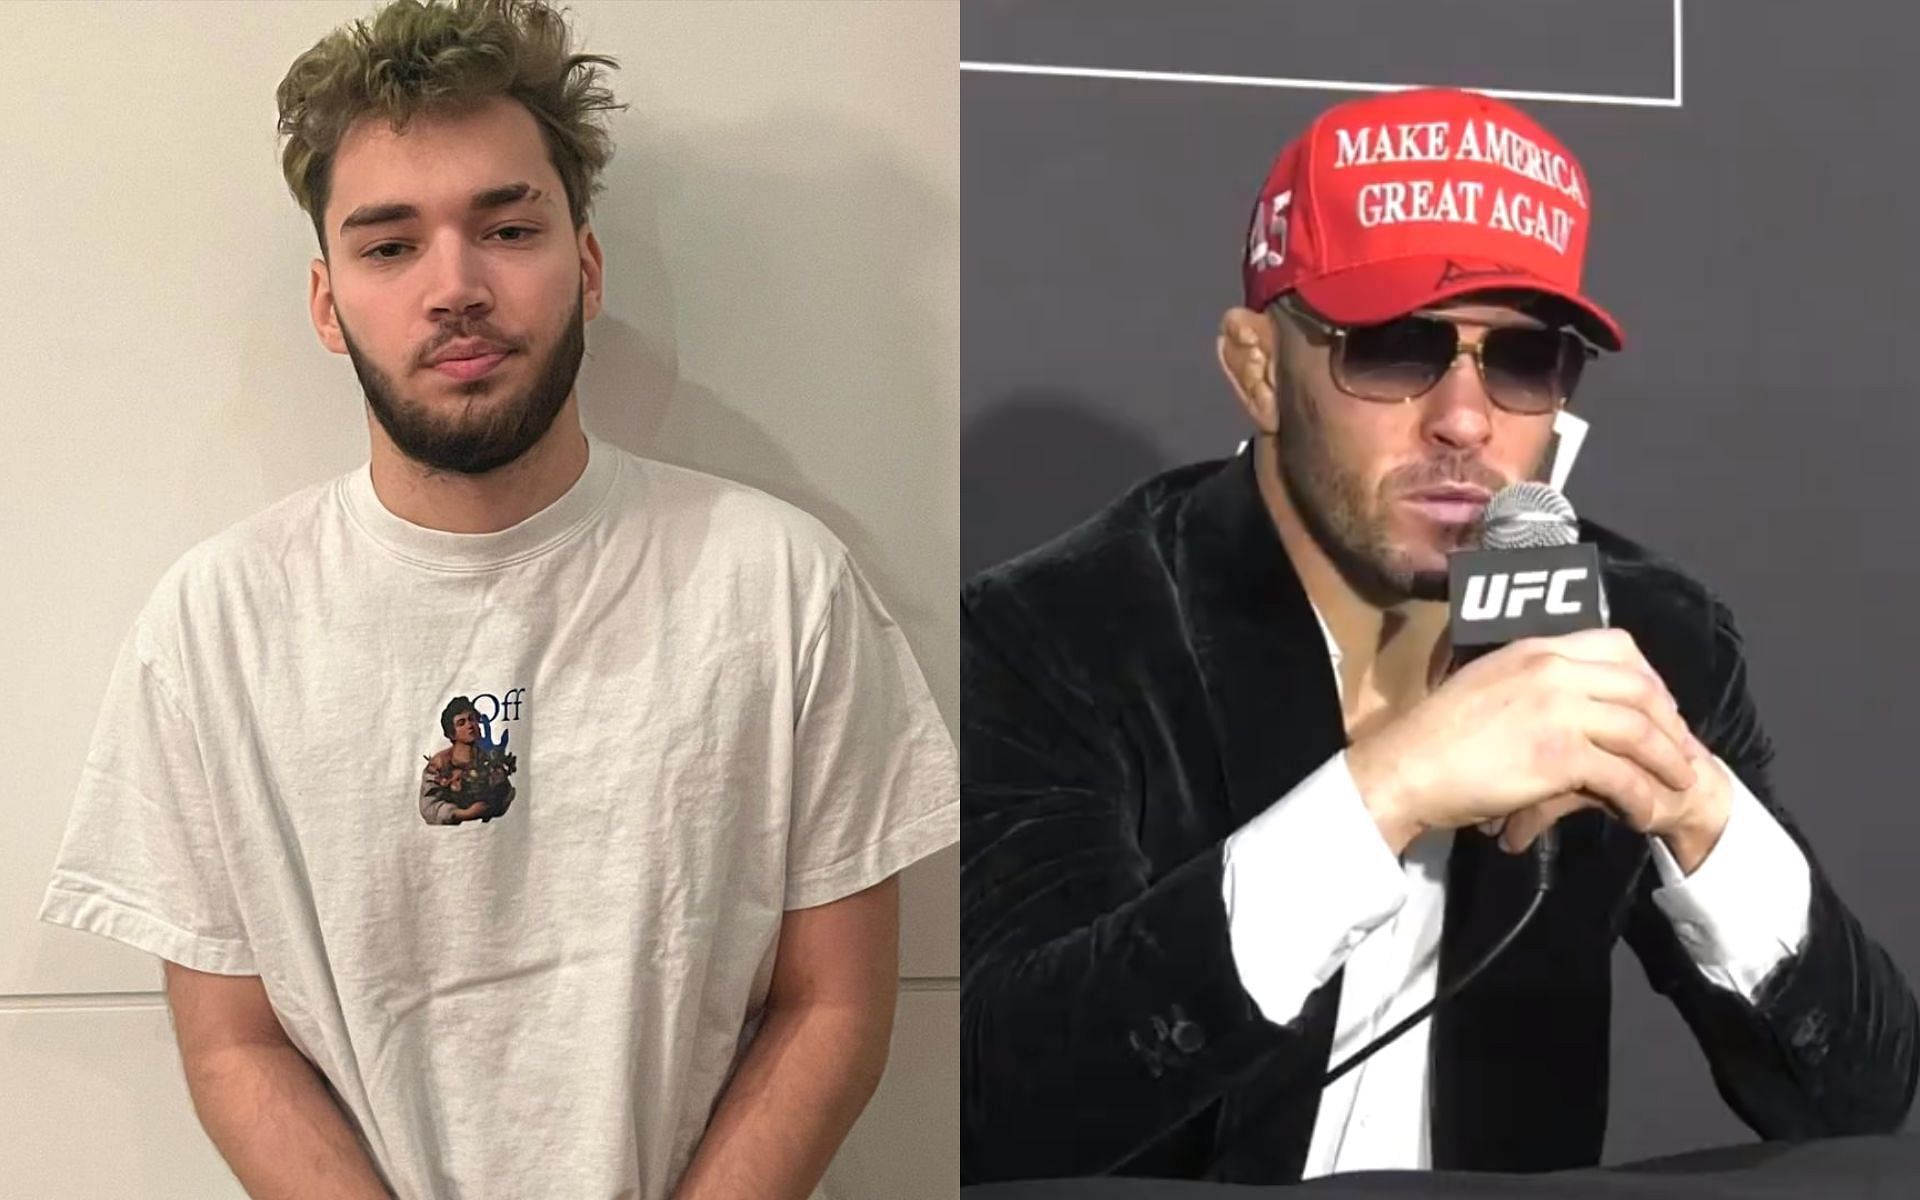 Adin Ross (left) and Colby Covington at the post fight press conference (right) (Images courtesy @adinross on Instagram and @MMAFighting on X)